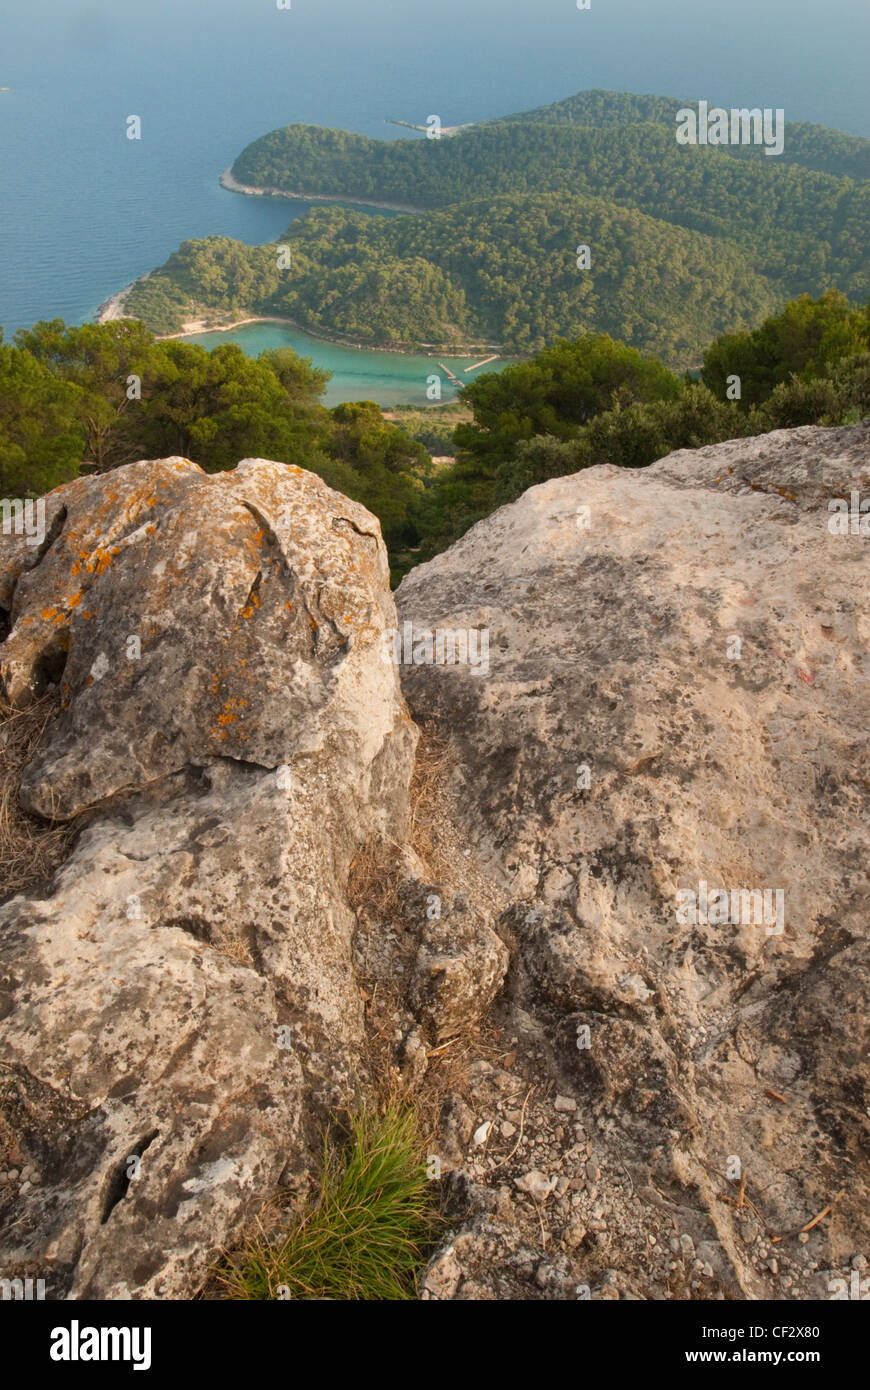 A view from the top of the island of Mljet down towards the entrance to the inland lakes and the sea defences Stock Photo